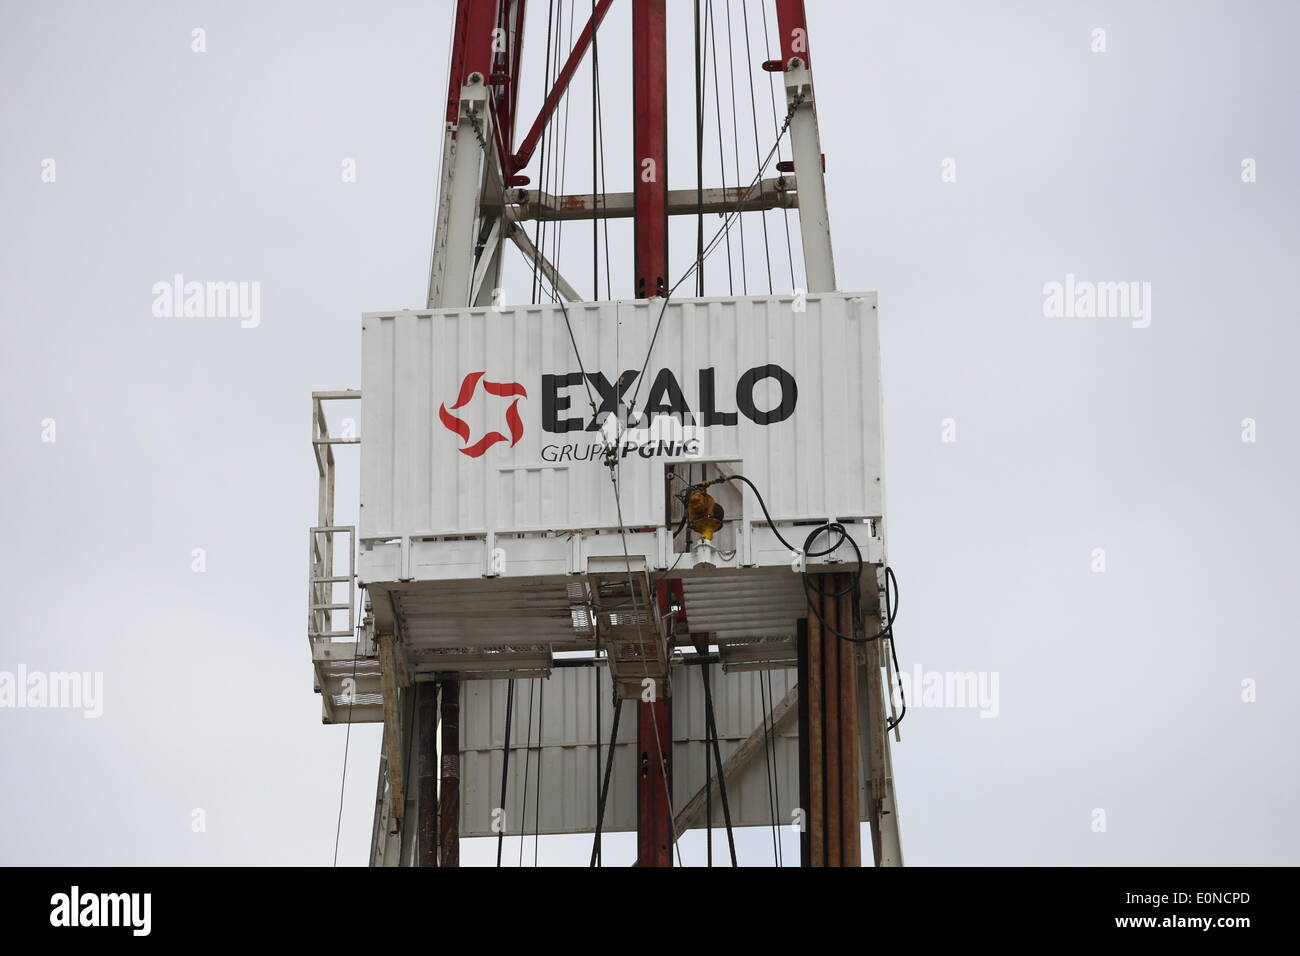 Milowo, Poland 17th, May 2014 The PGNiG SA Company started new shale gas research in Milowo in northern Poland  (the Kartuzy concession). The drilling process will take 2 months and is planned to 3800-meters depth. Credit:  Michal Fludra/Alamy Live News Stock Photo